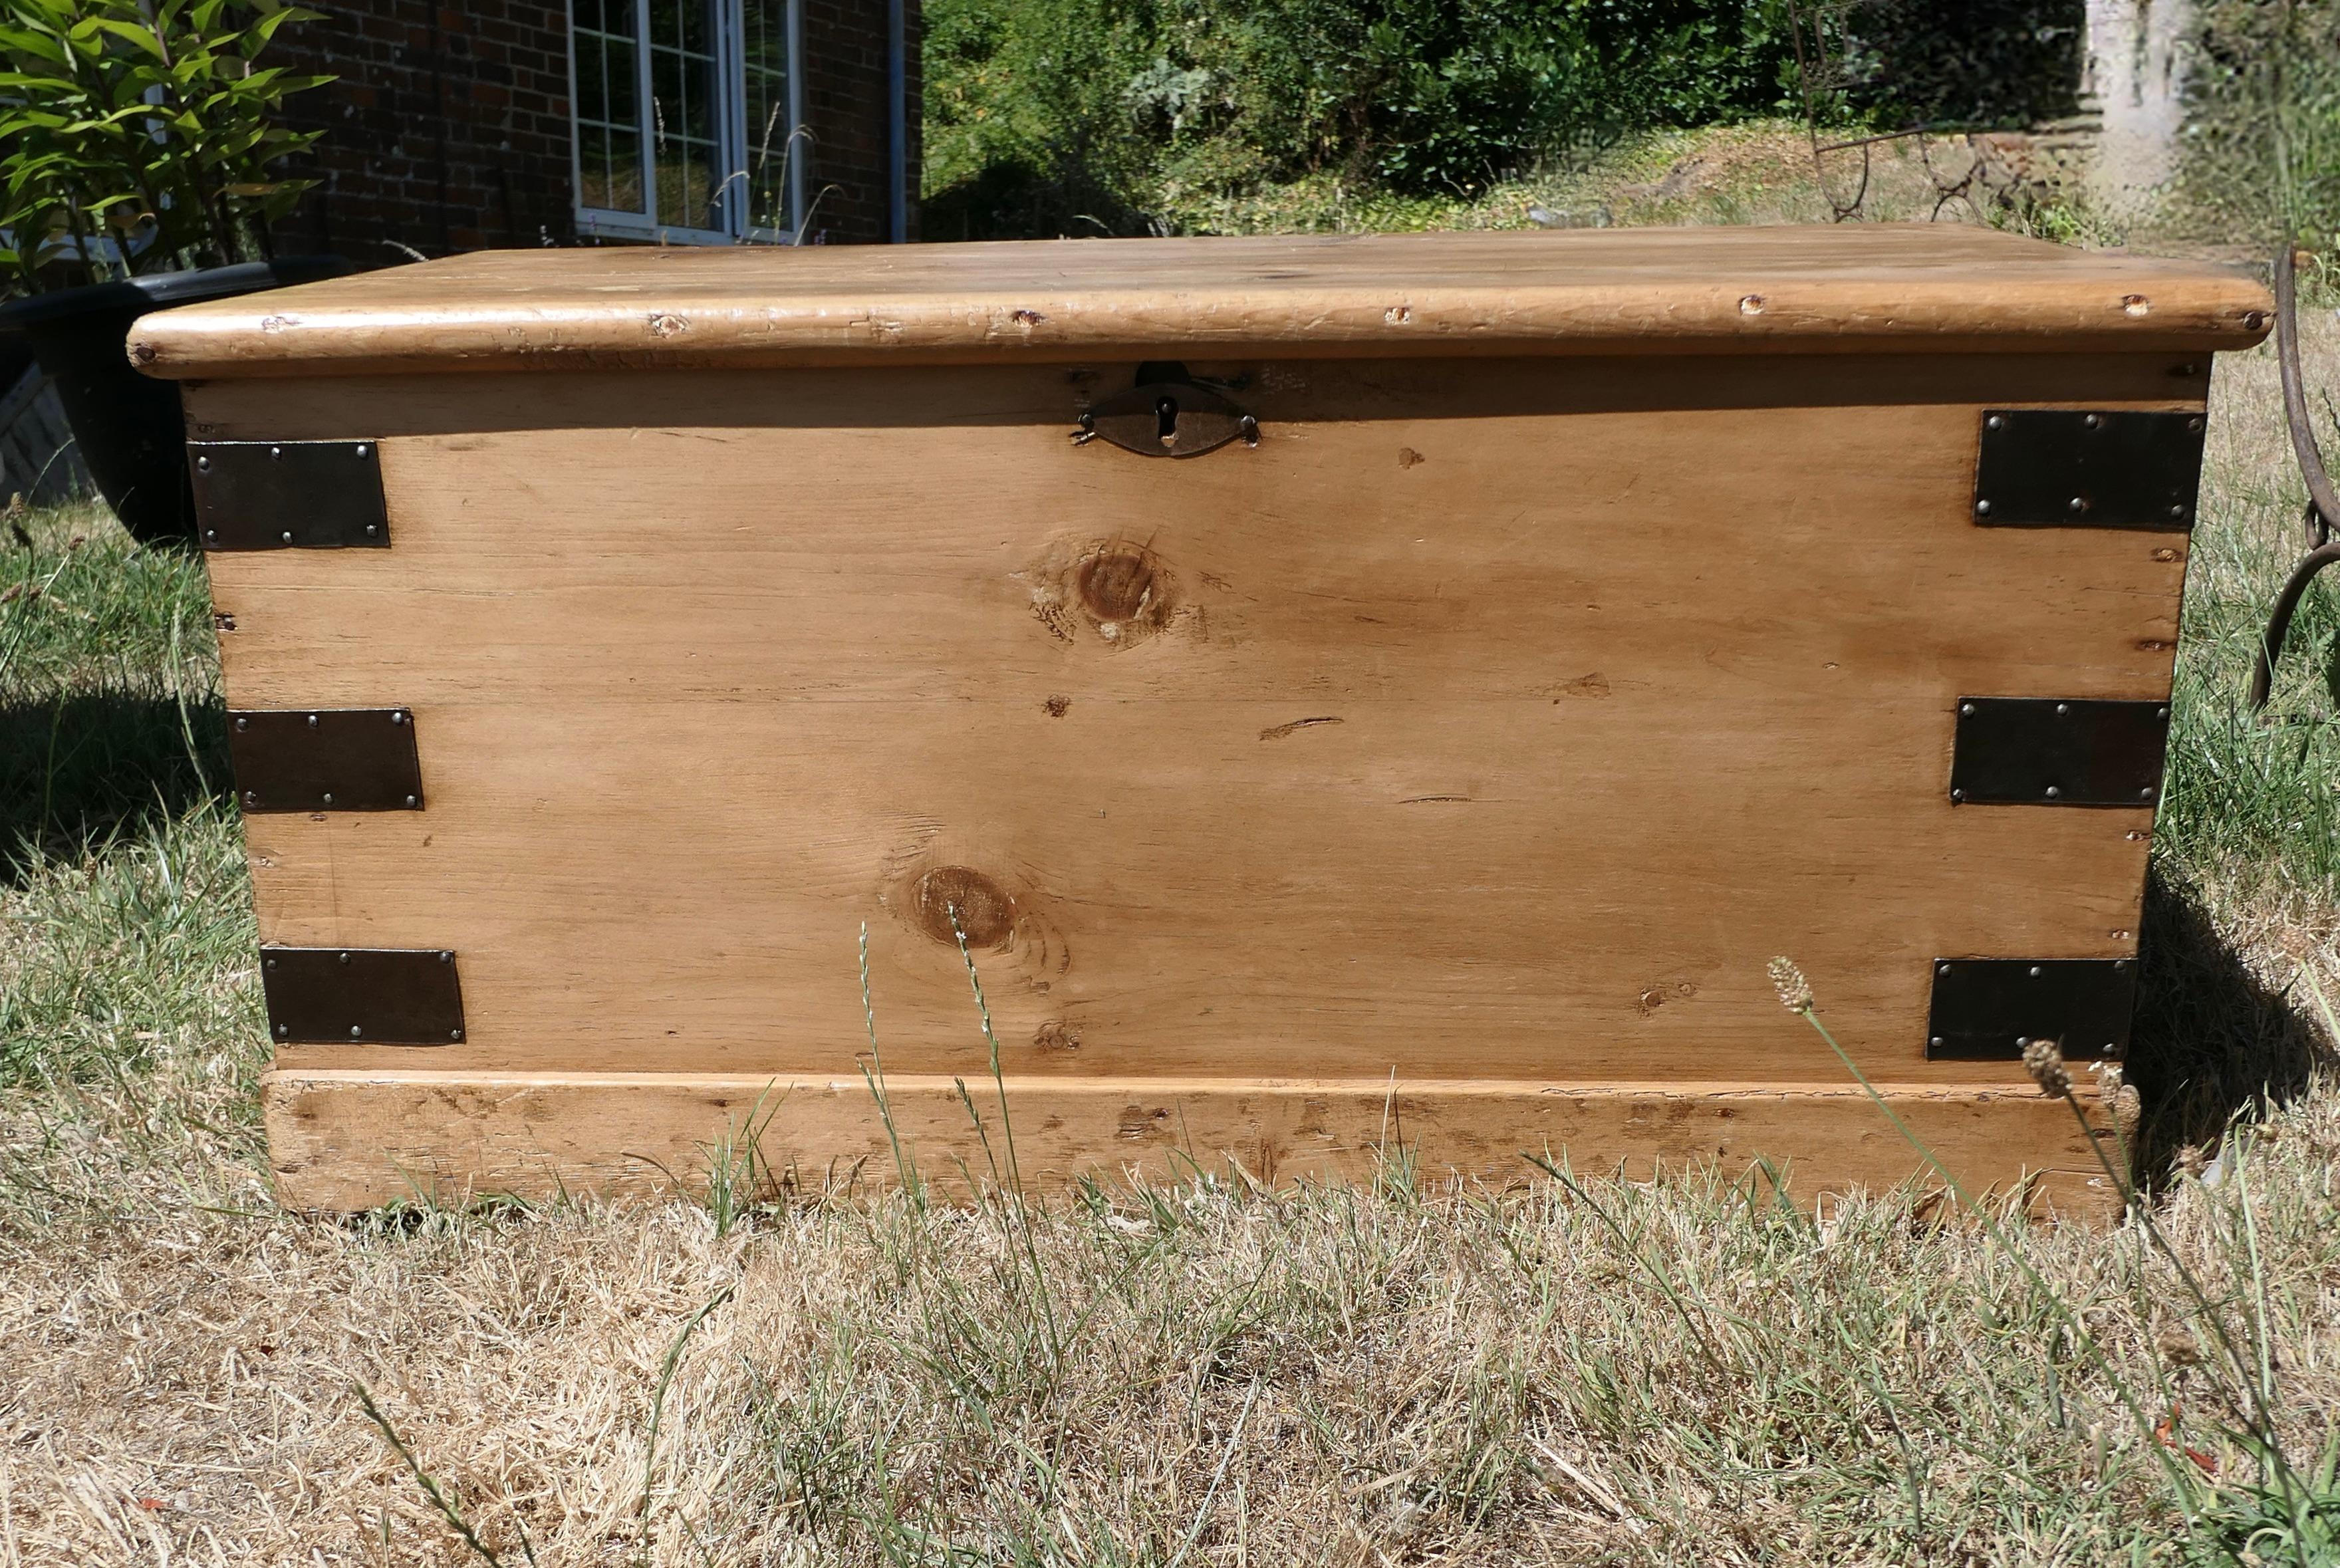 Stripped Pine Blanket Box, Coffee Table or ToyBox
 
Victorian Pine Blanket Box or Coffee Table, this piece has many uses
This is a good quality pine box it has been fully restored, it has metal bound corners which gives plenty of strength to the